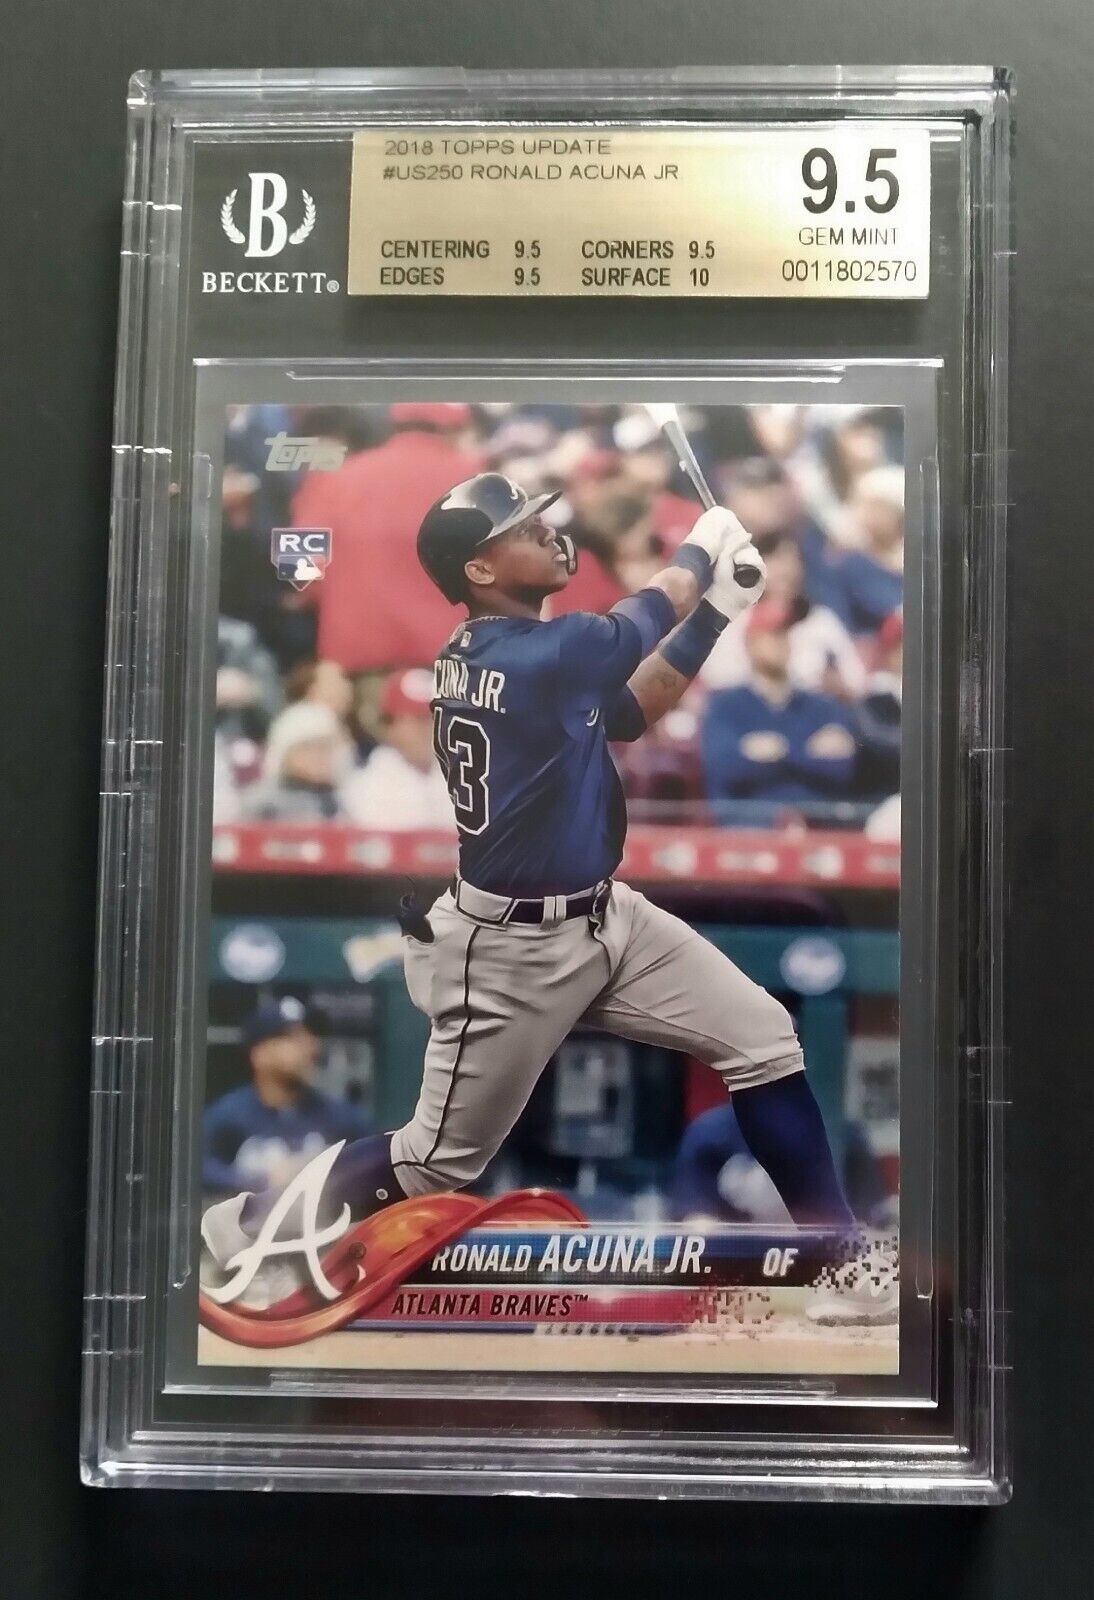 2018 Topps Update #US250  Ronald Acuna Jr  Rookie RC BGS 9.5 Gem Plus HIGH SUBS